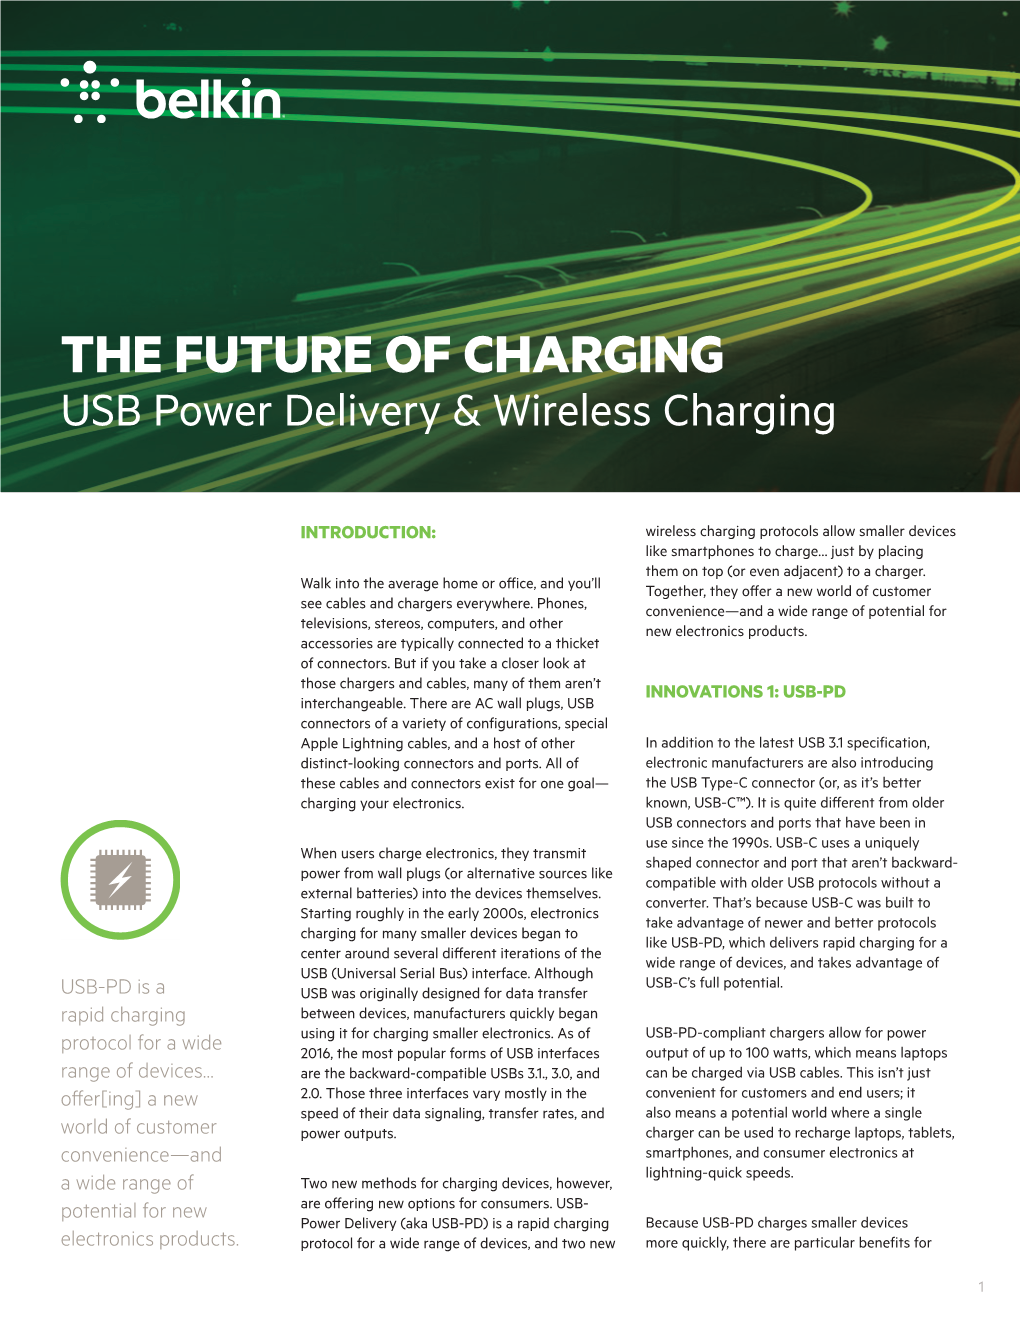 THE FUTURE of CHARGING USB Power Delivery & Wireless Charging